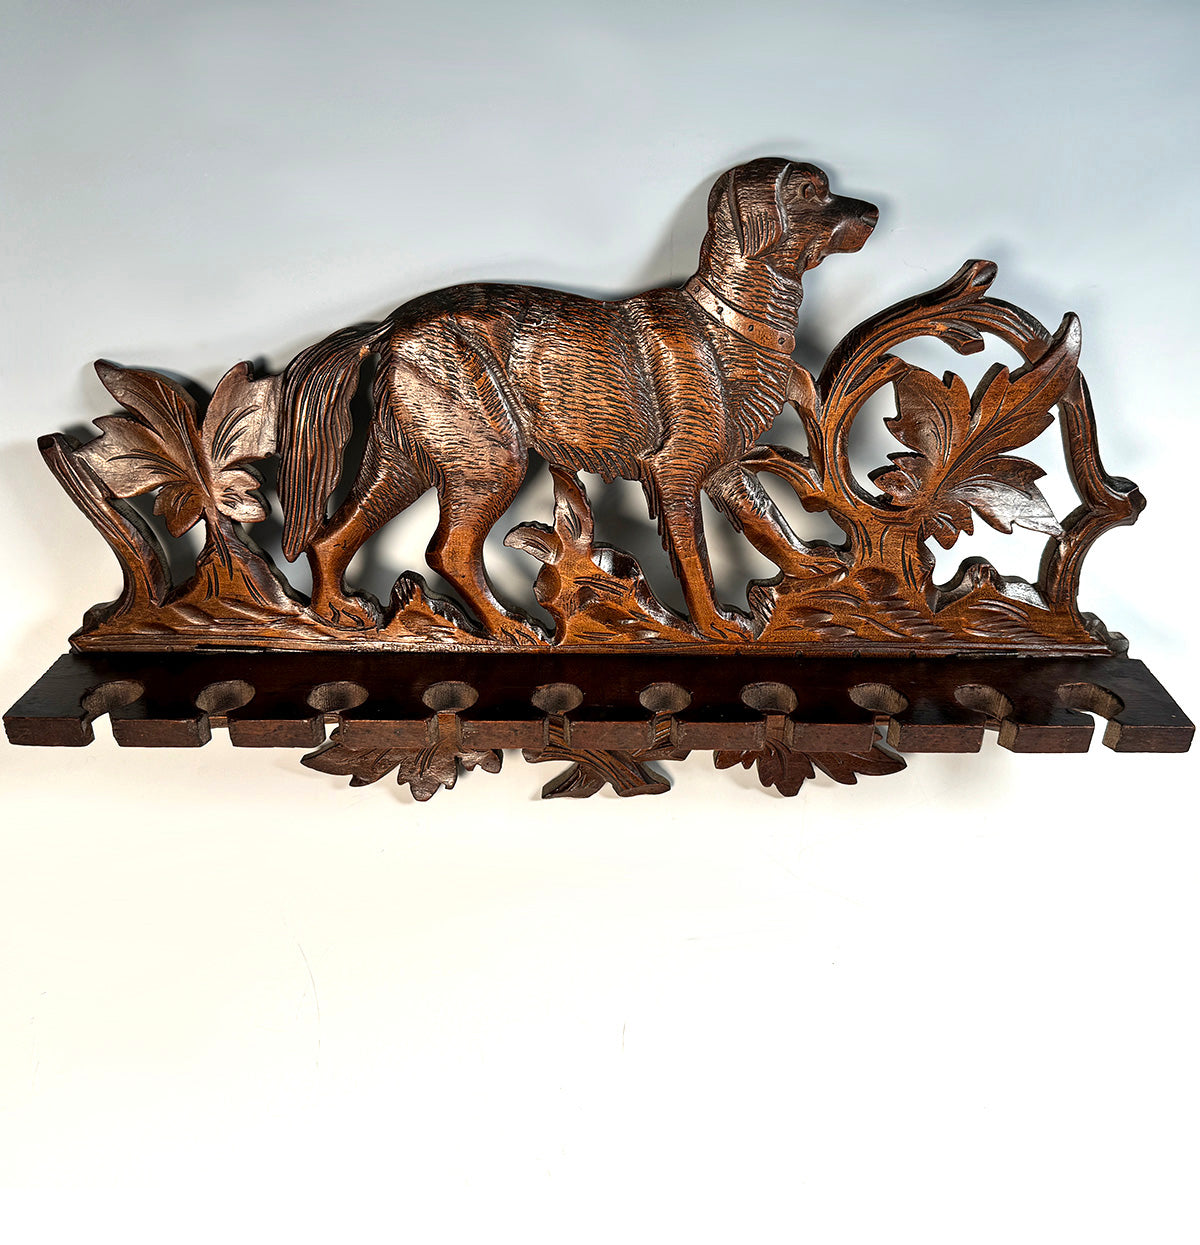 Antique Hand Carved 15.5" Black Forest Plaque, Pipe or Crop Rack with Hunting Dog or Hound